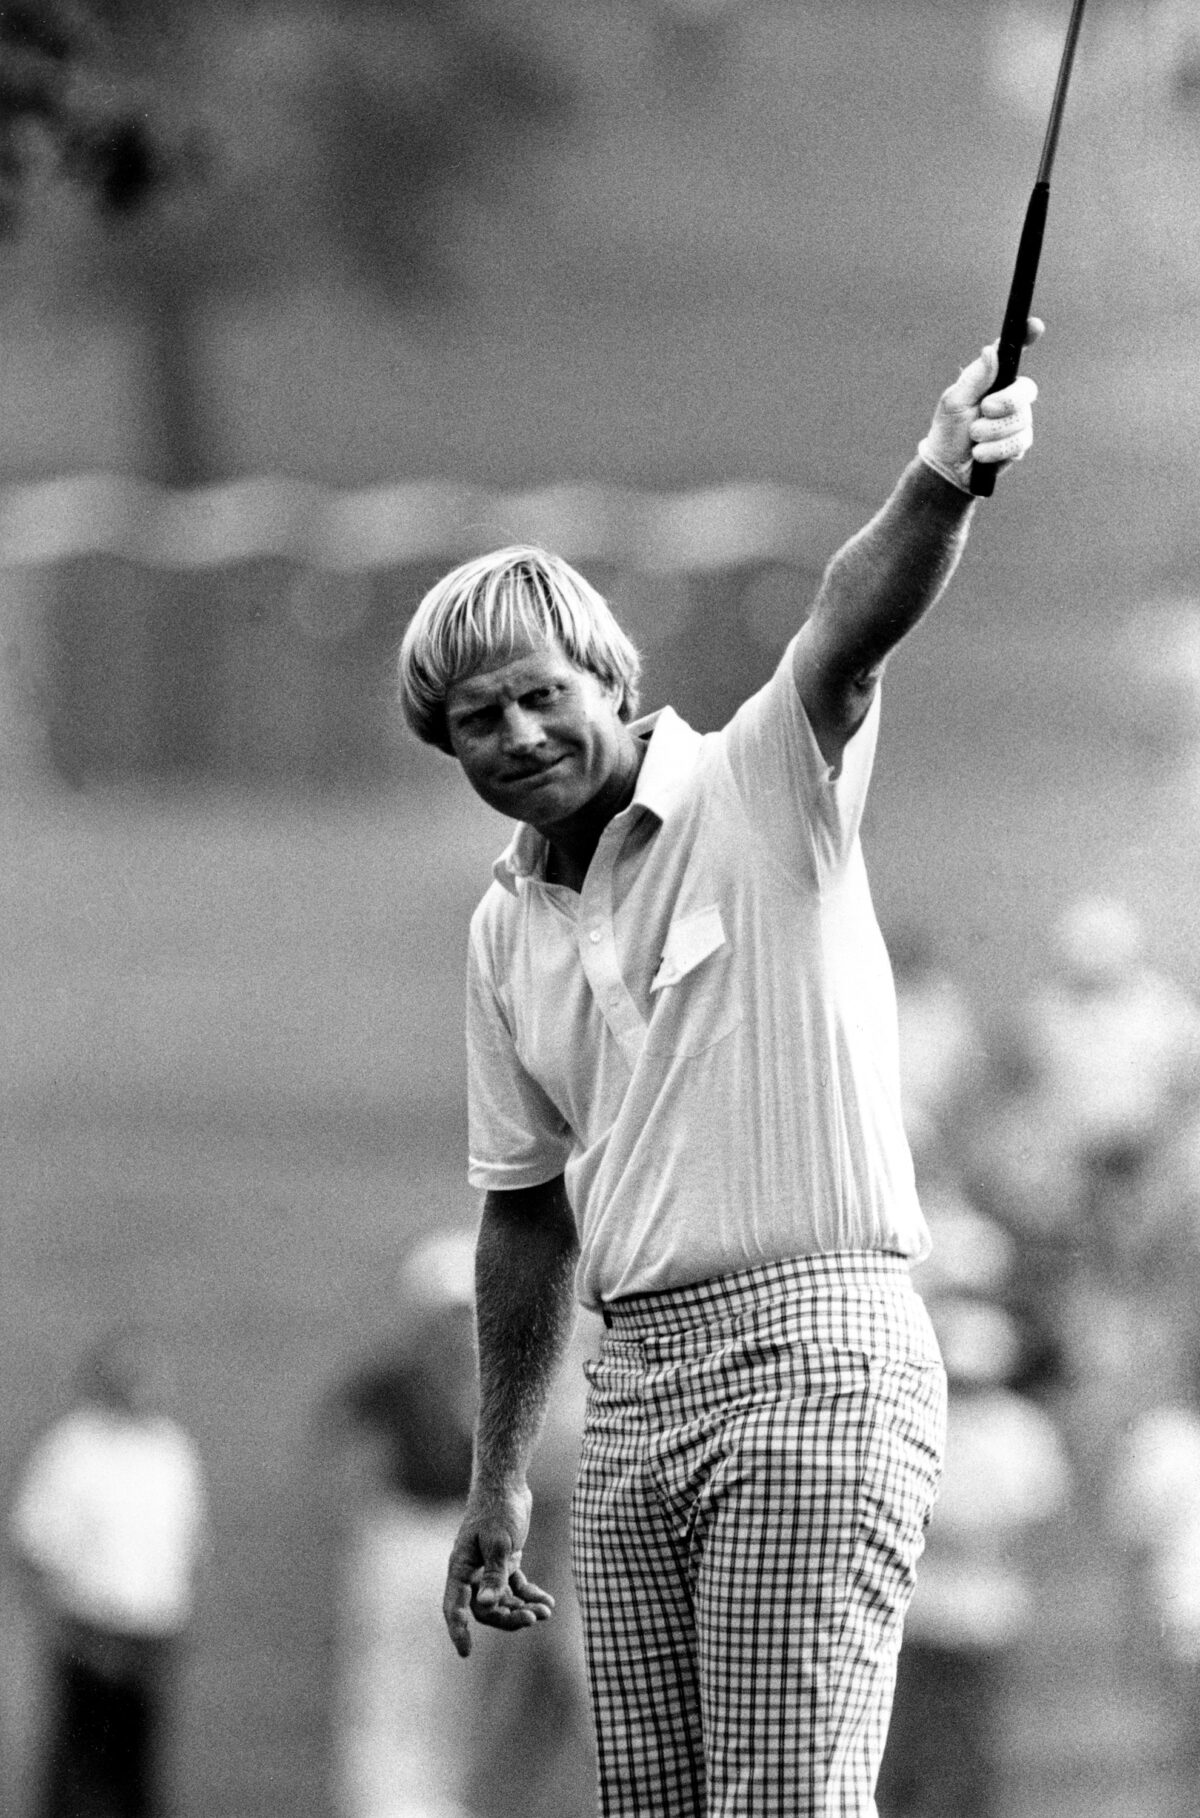 PGA Championship history: Jack Nicklaus’ win at Oak Hill in 1980 showed his dominance and versatility